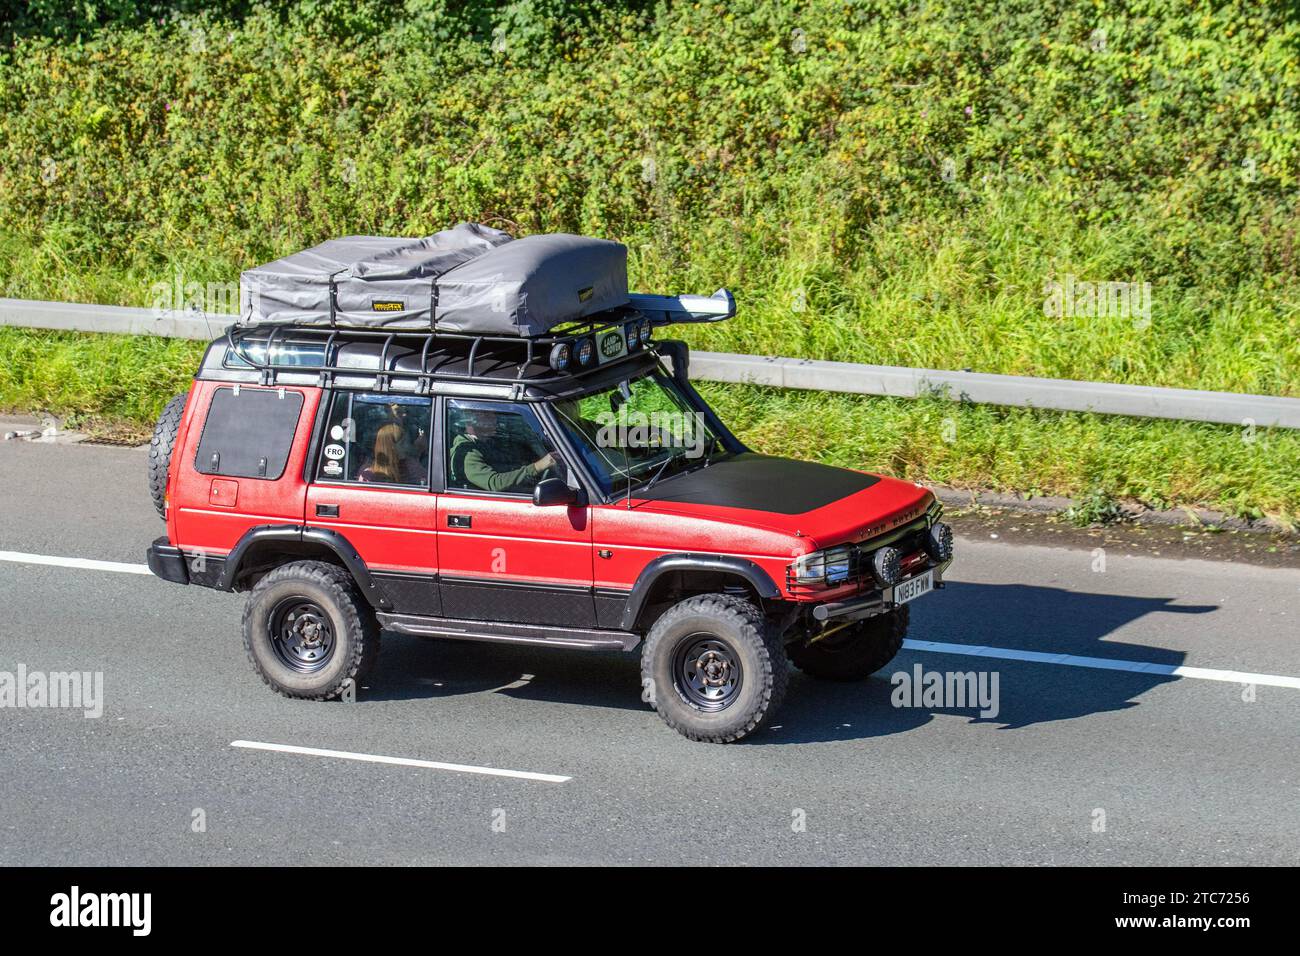 1995 90s nineties Red Black two-tone Land Rover Discovery 300 TDi Diesel Hardtop 2495 cc. Direct 4x4 Off-road Expedition; Vintage, restored classic motors, automobile collectors motoring enthusiasts, historic veteran cars travelling in Greater Manchester, UK Stock Photo